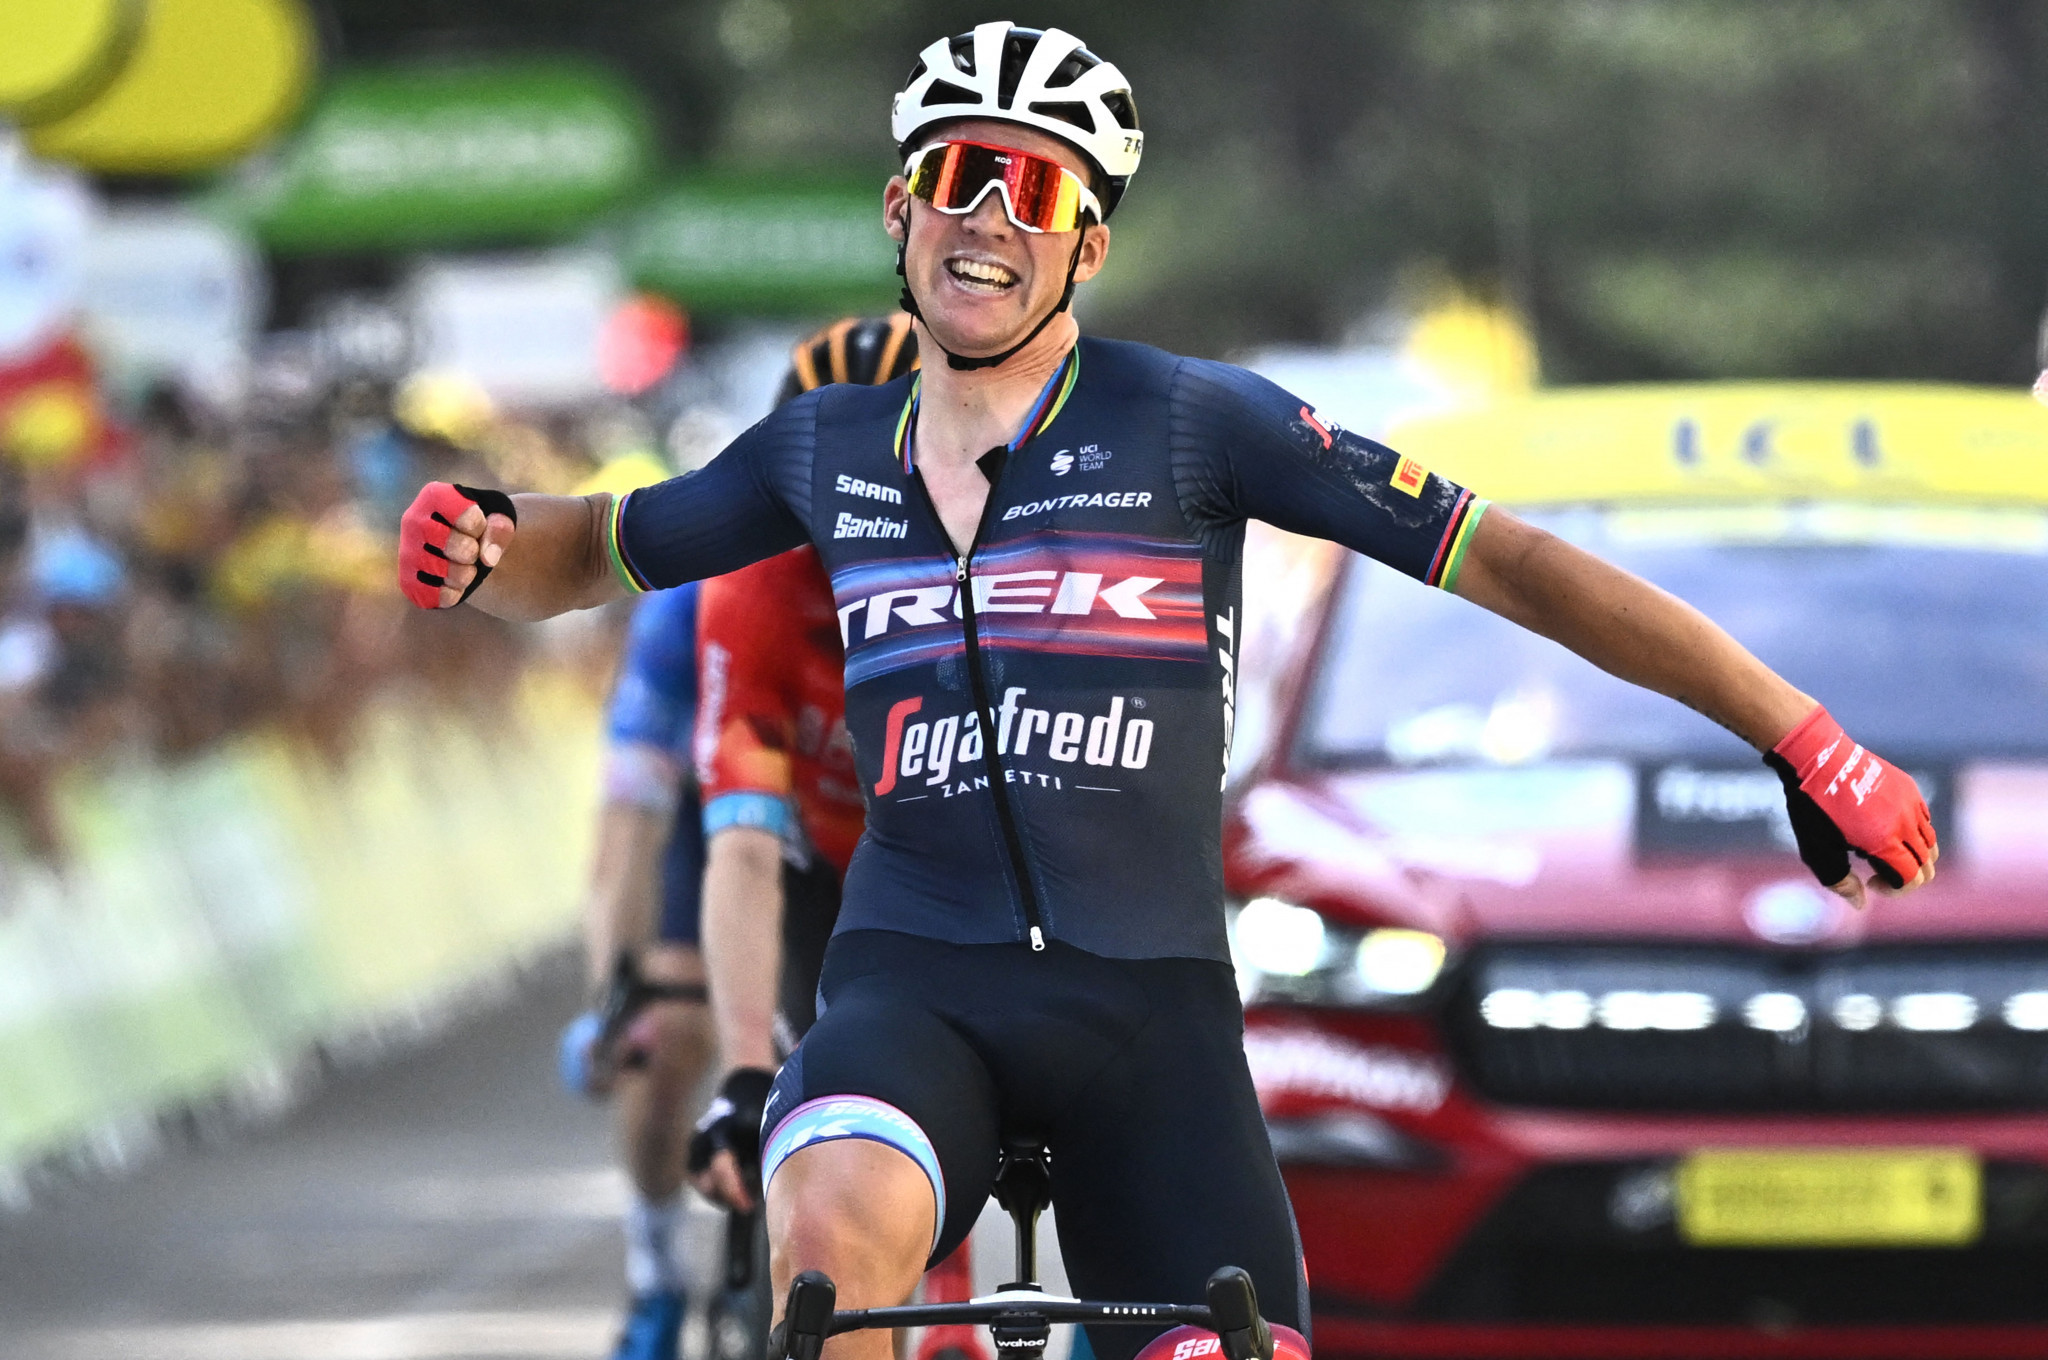 Pedersen storms to first Grand Tour stage victory at Tour de France